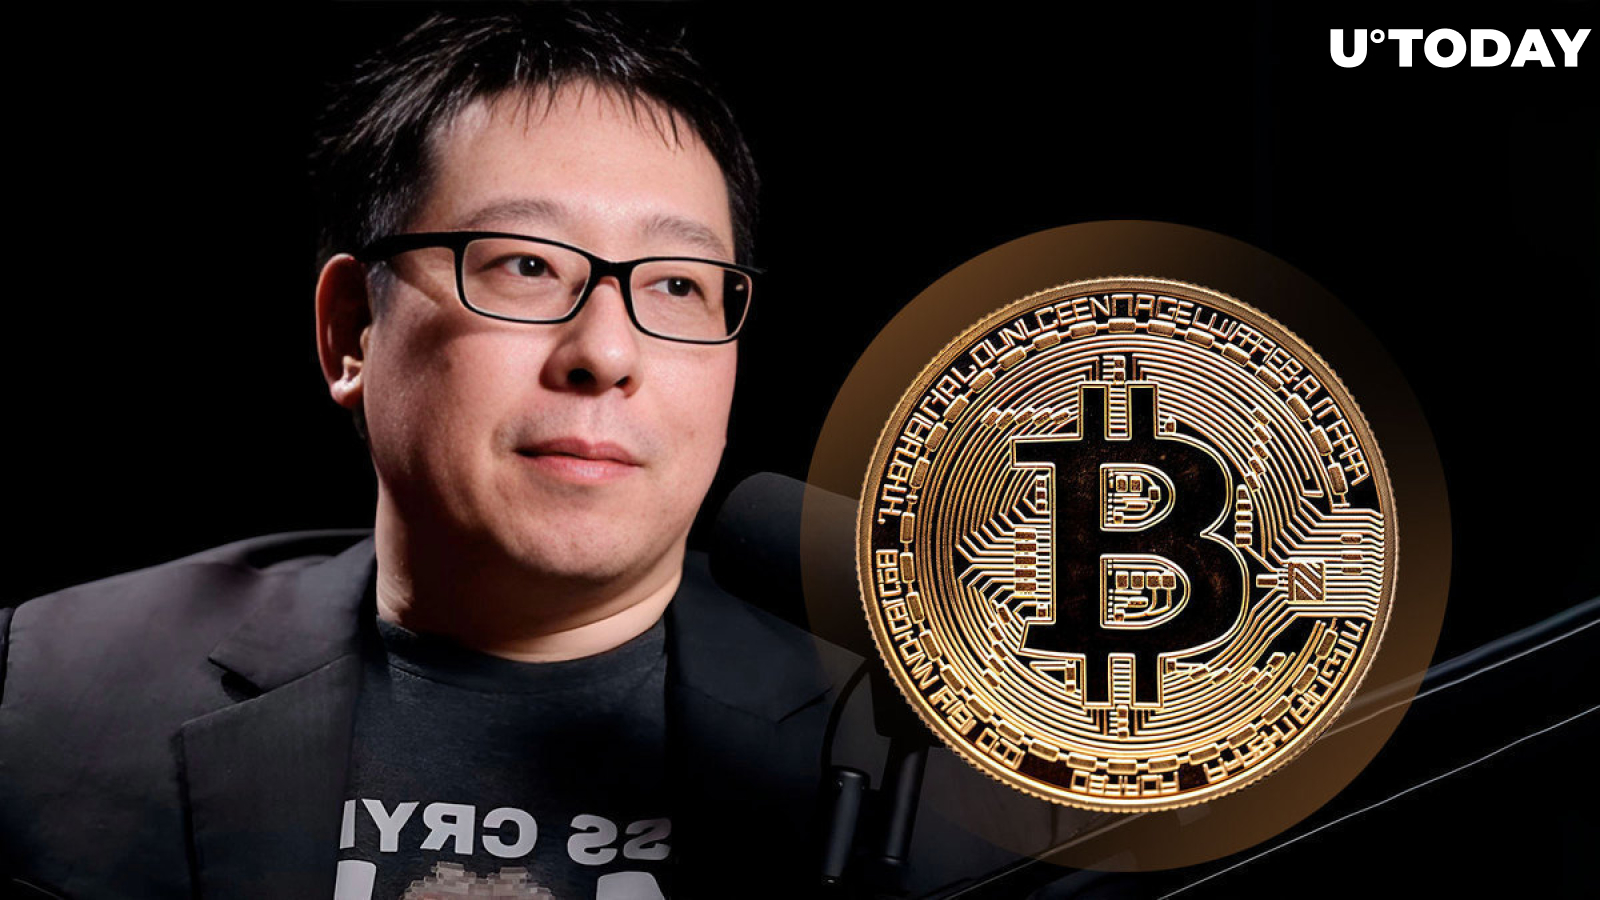 ‘$1 Million Bitcoin’ Advocate Samson Mow Says Price Run Not Even Started Yet